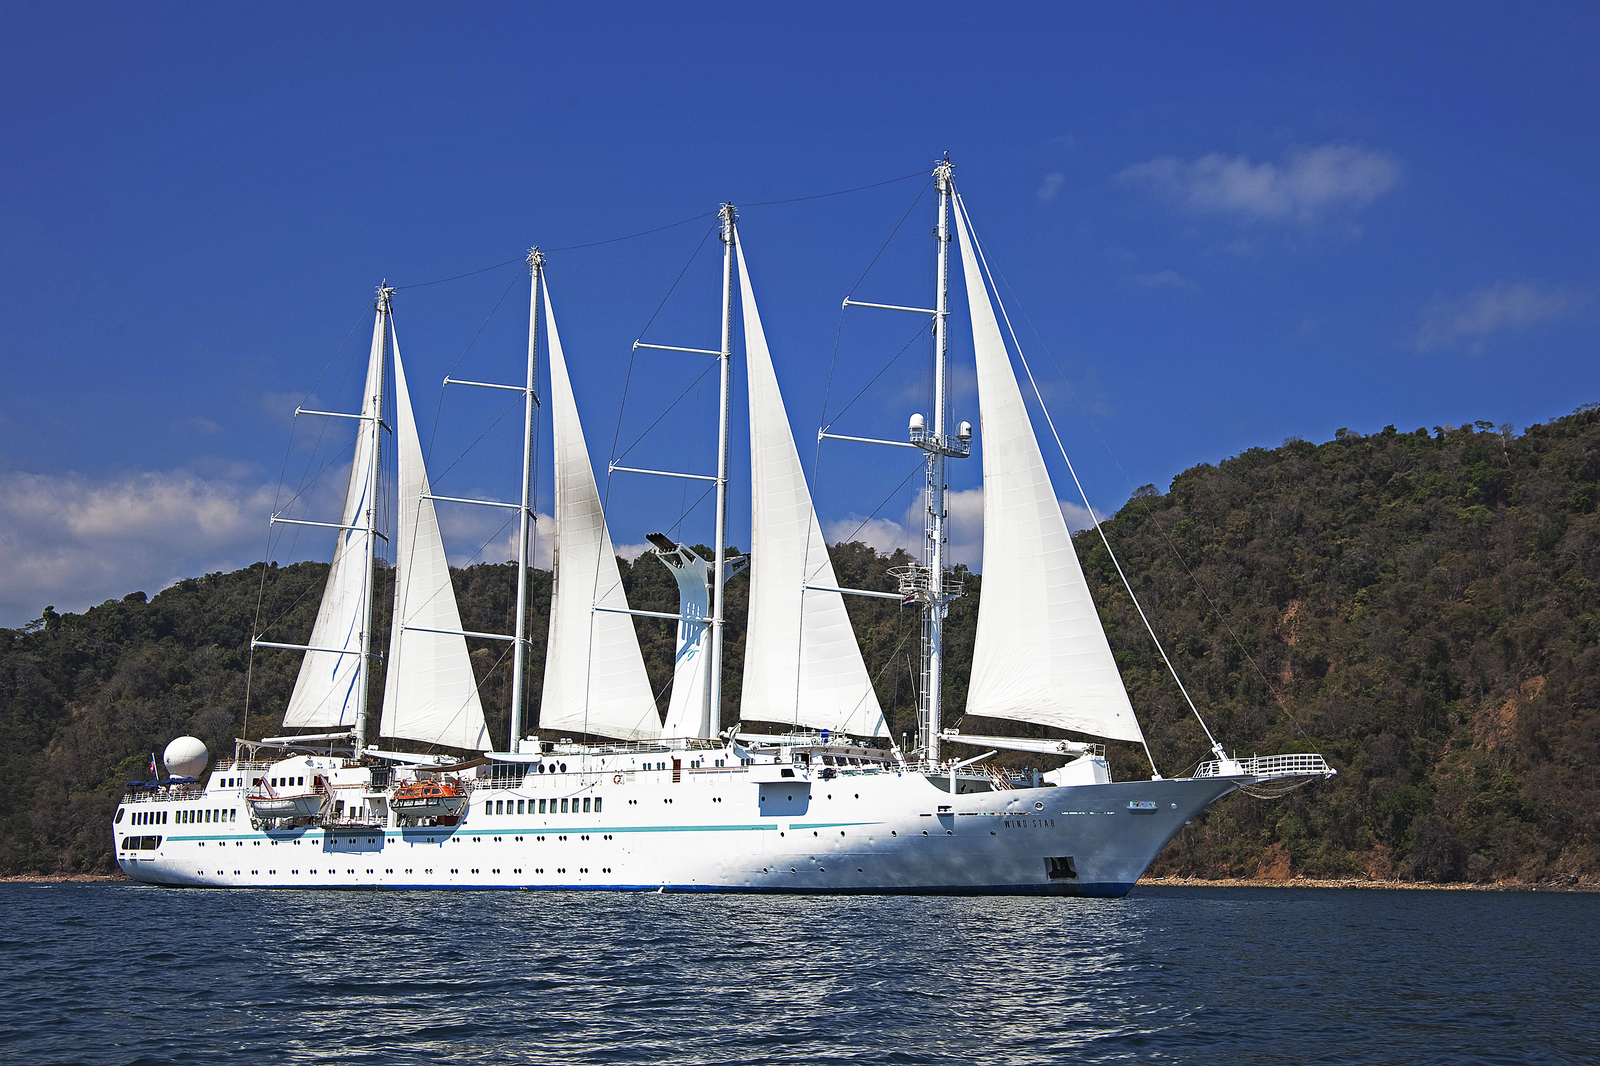 Windstar Ranked No. 1 Small Ship Cruise Line for Panama Canal and